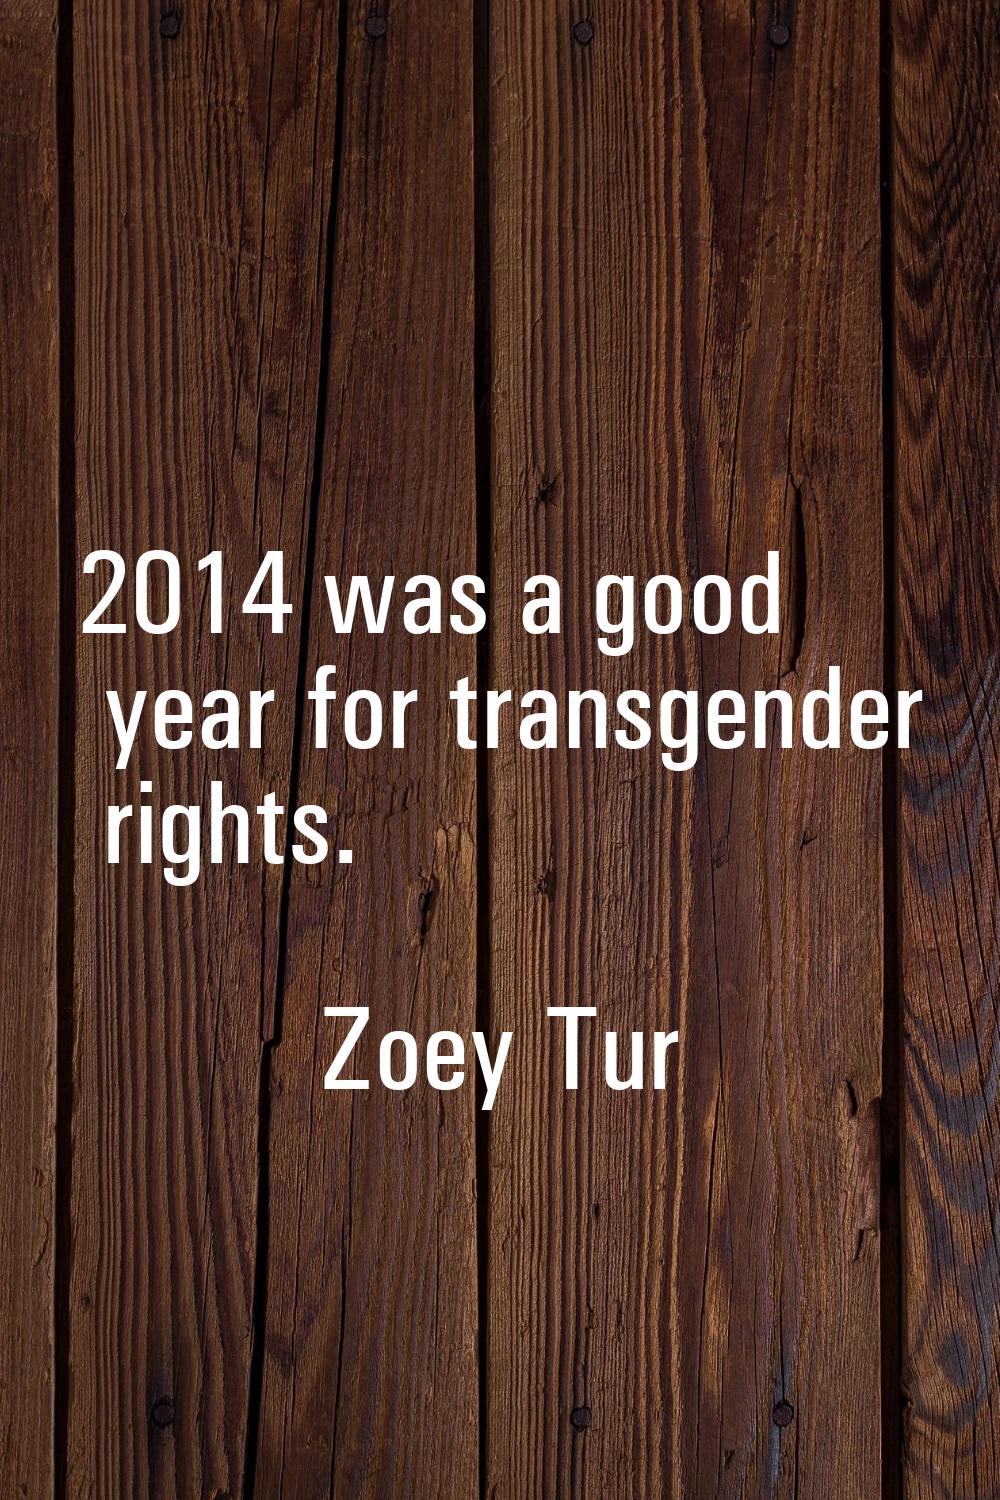 2014 was a good year for transgender rights.